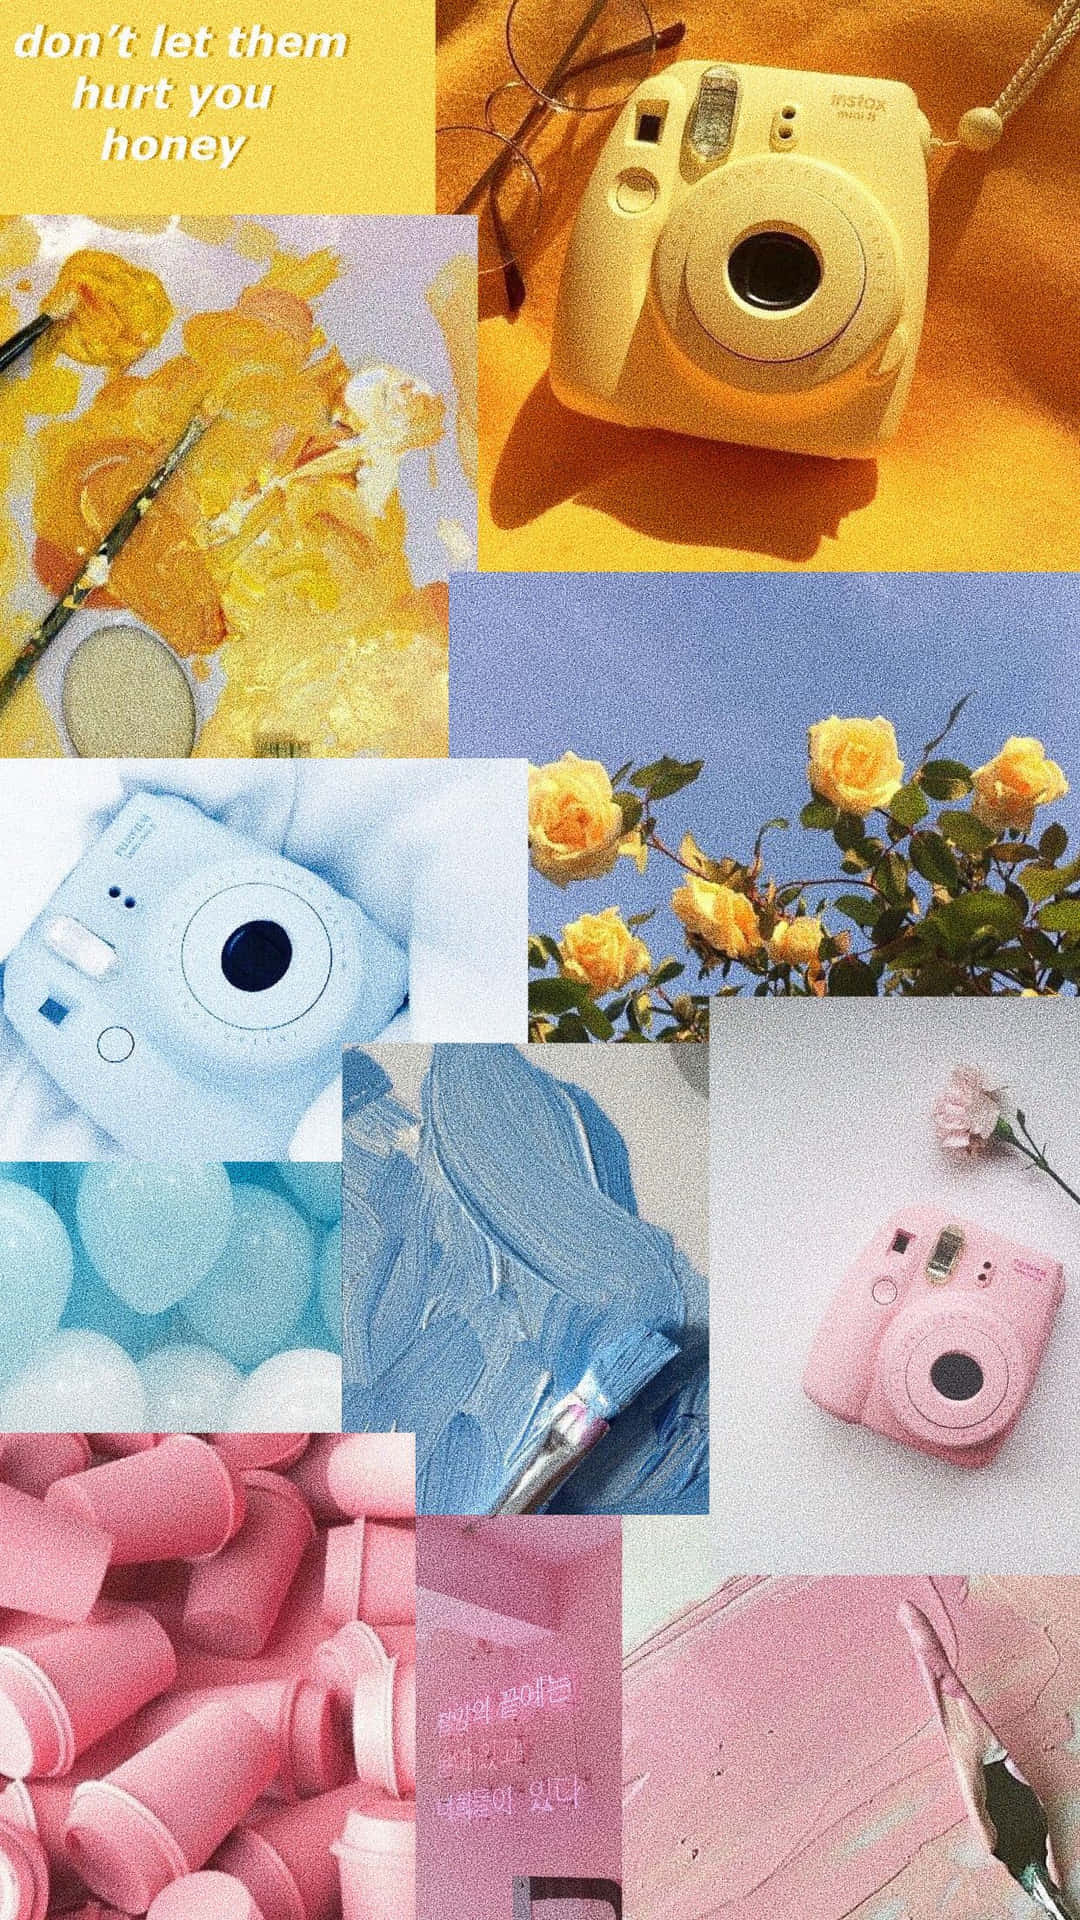 A Collage Of Pictures Of Flowers, A Camera, And A Camera Wallpaper